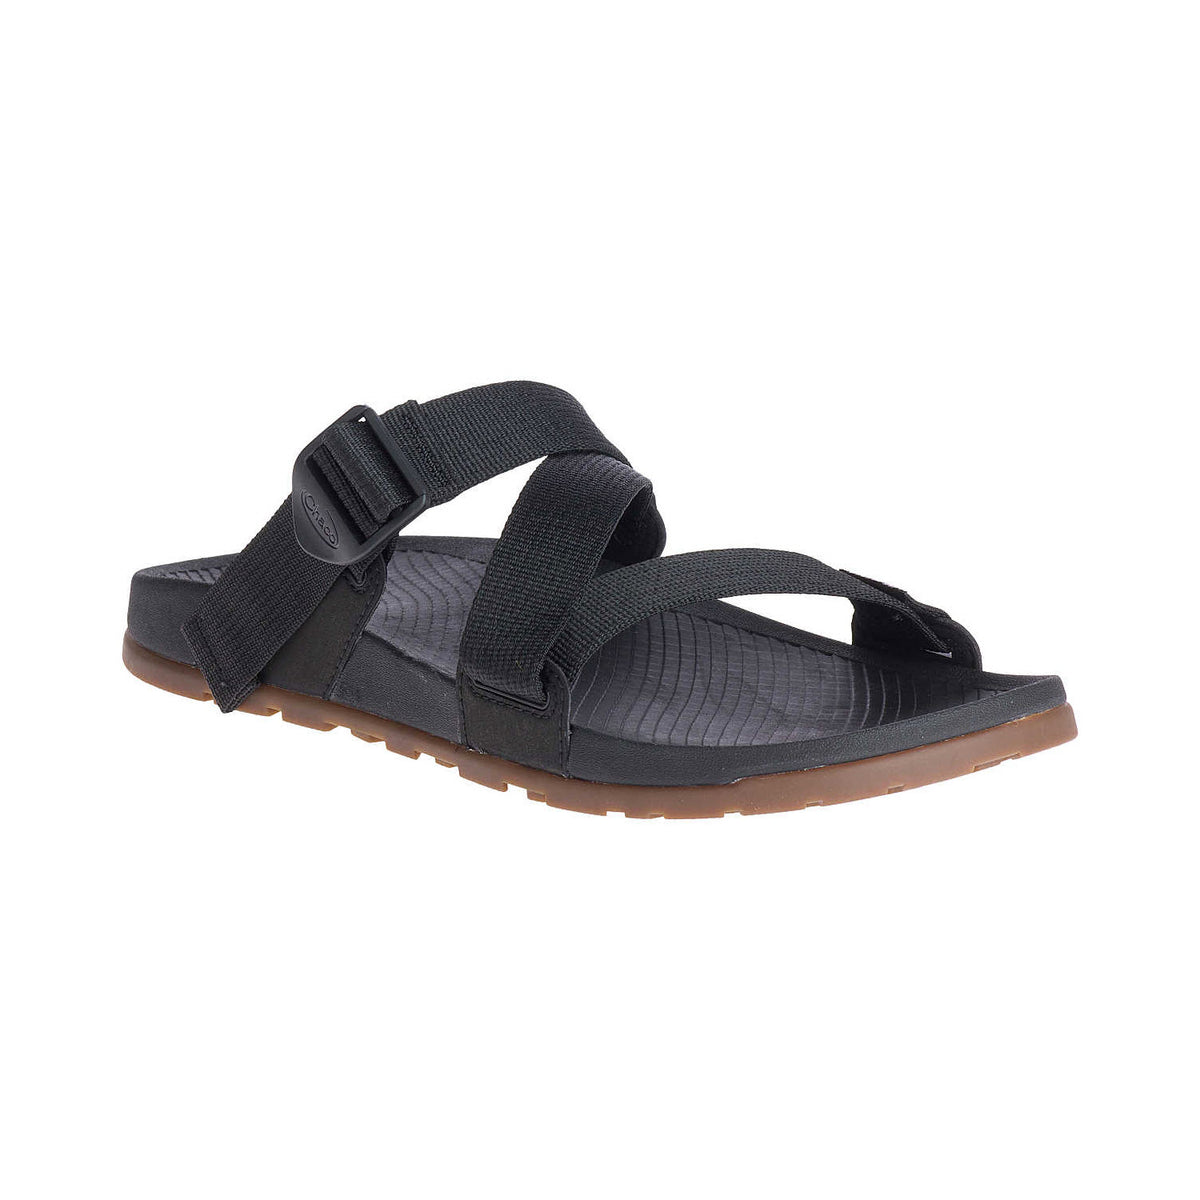 Chaco Lowdown Slide sport sandal with adjustable straps and a textured footbed on a white background.

Revised Sentence: Chaco Lowdown Slide Woven Black sport sandal with adjustable straps and a textured footbed on a white background.